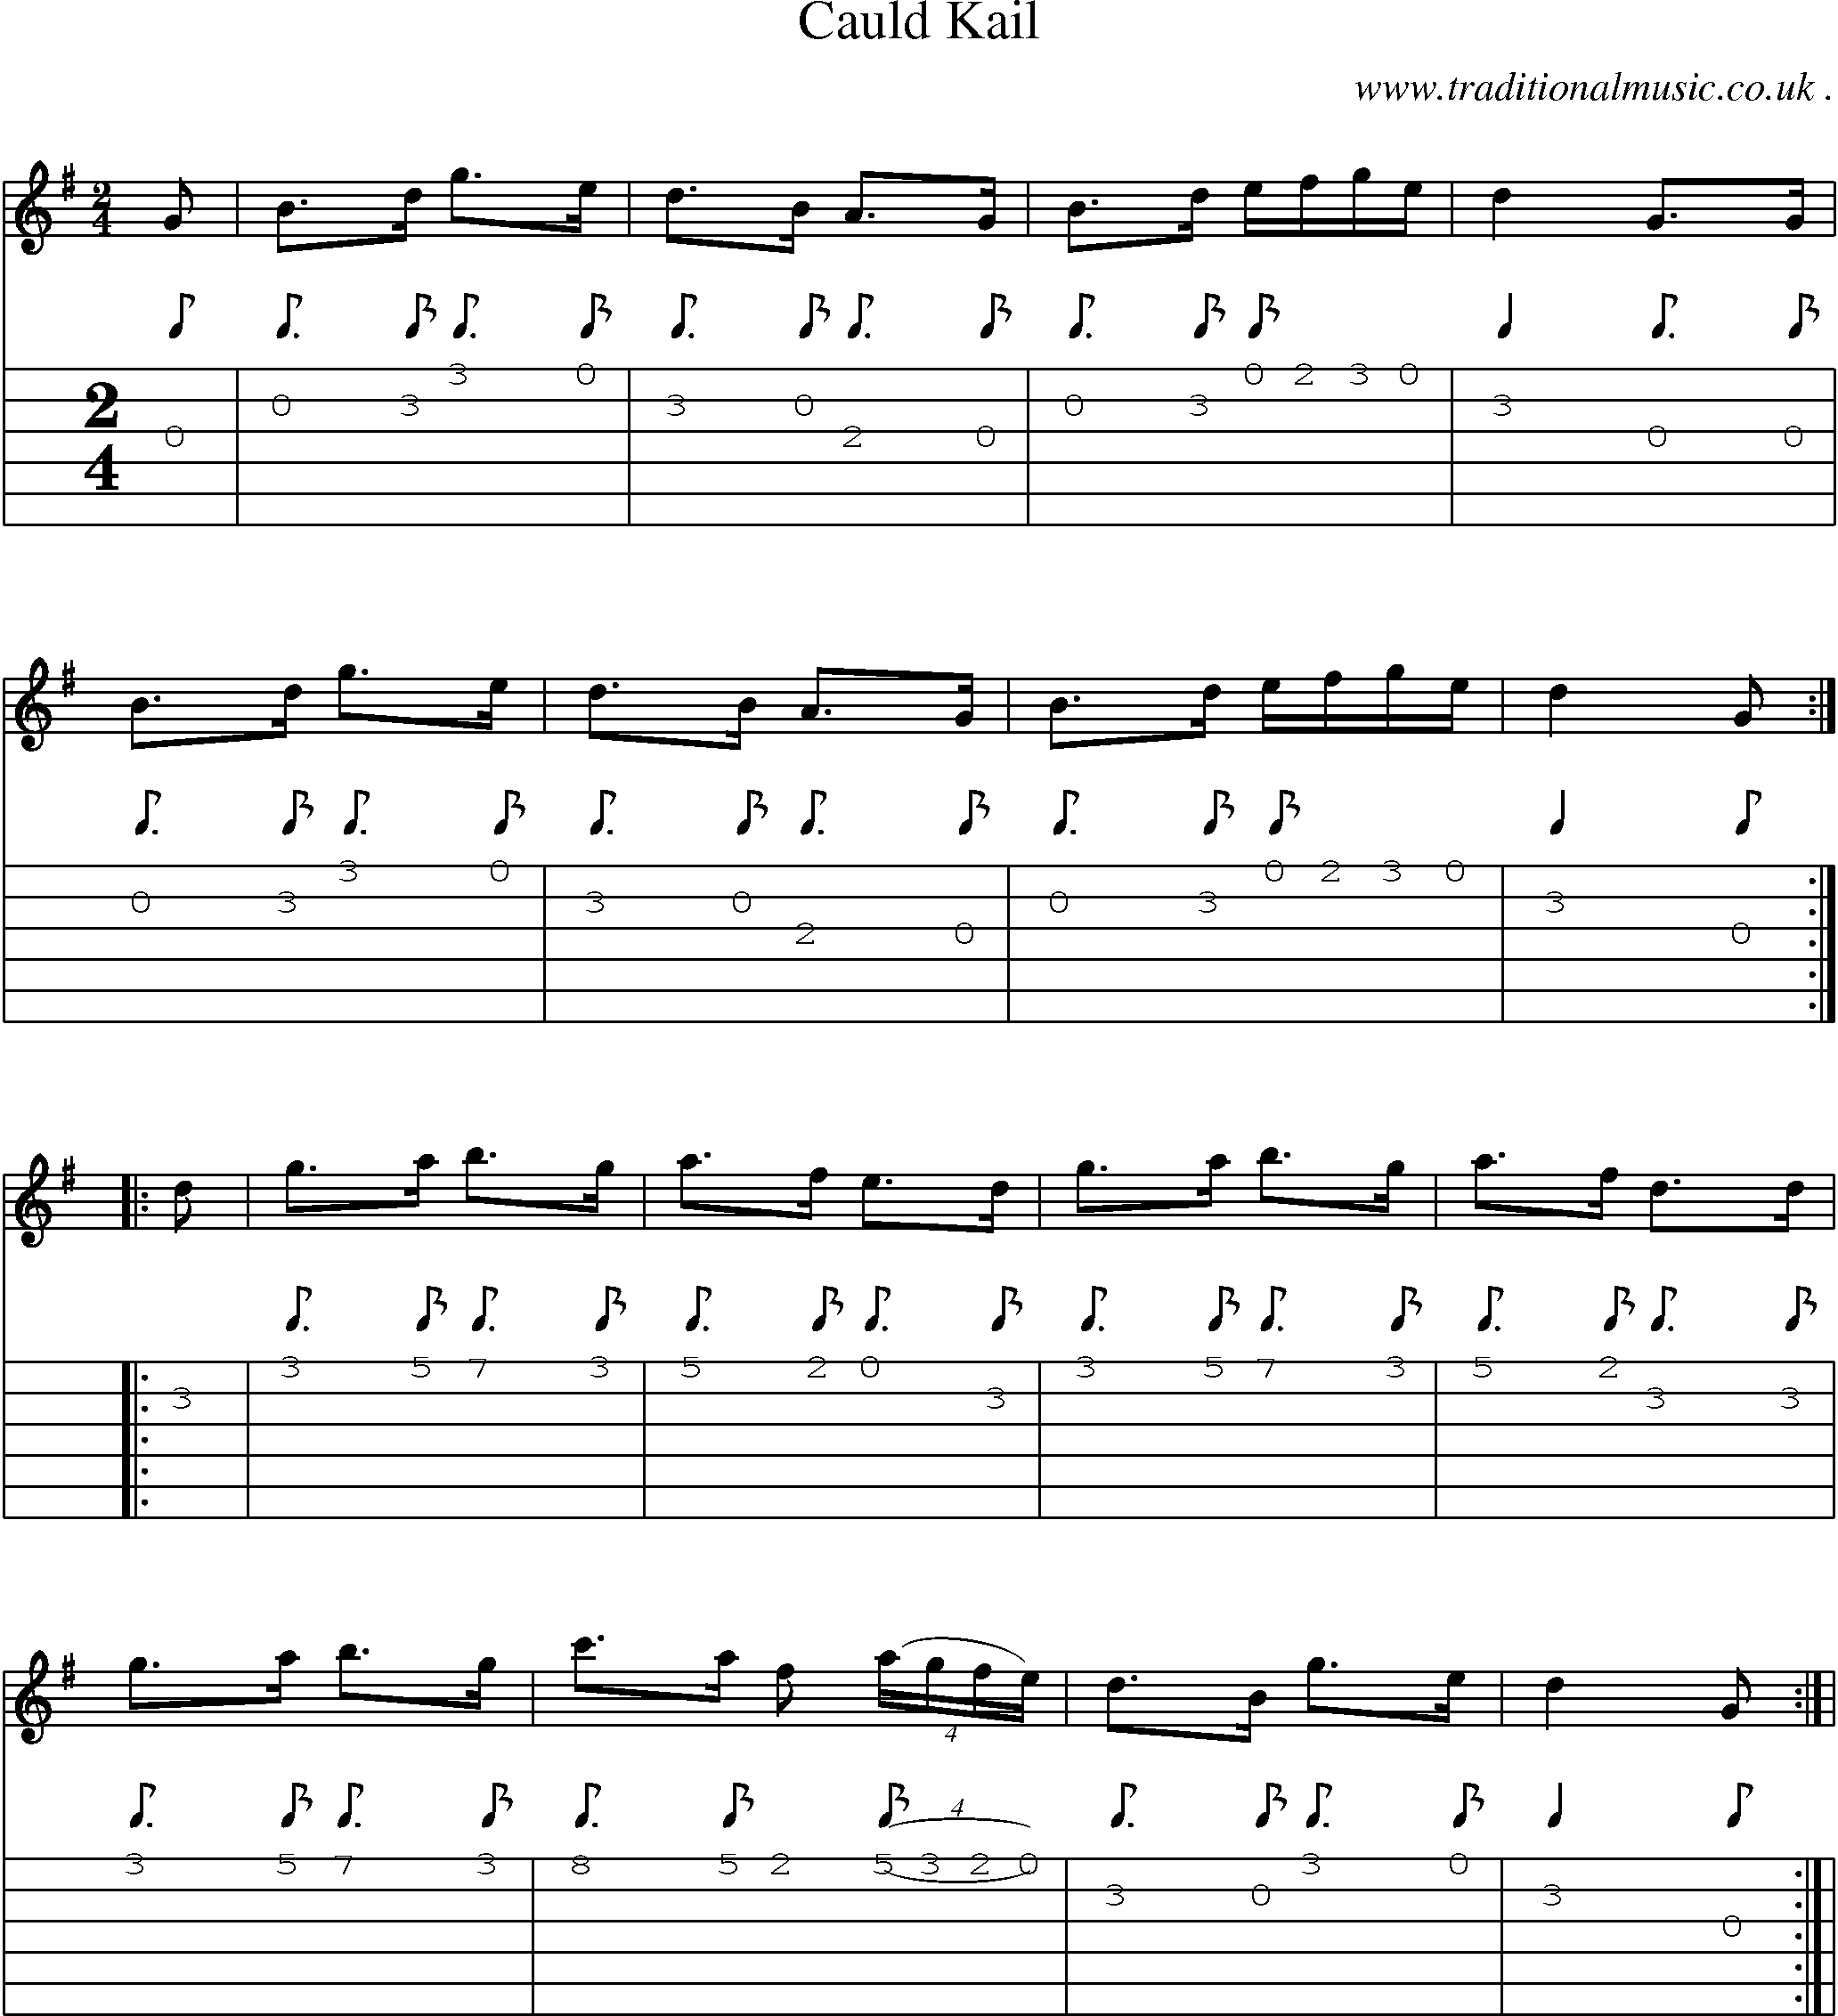 Sheet-Music and Guitar Tabs for Cauld Kail